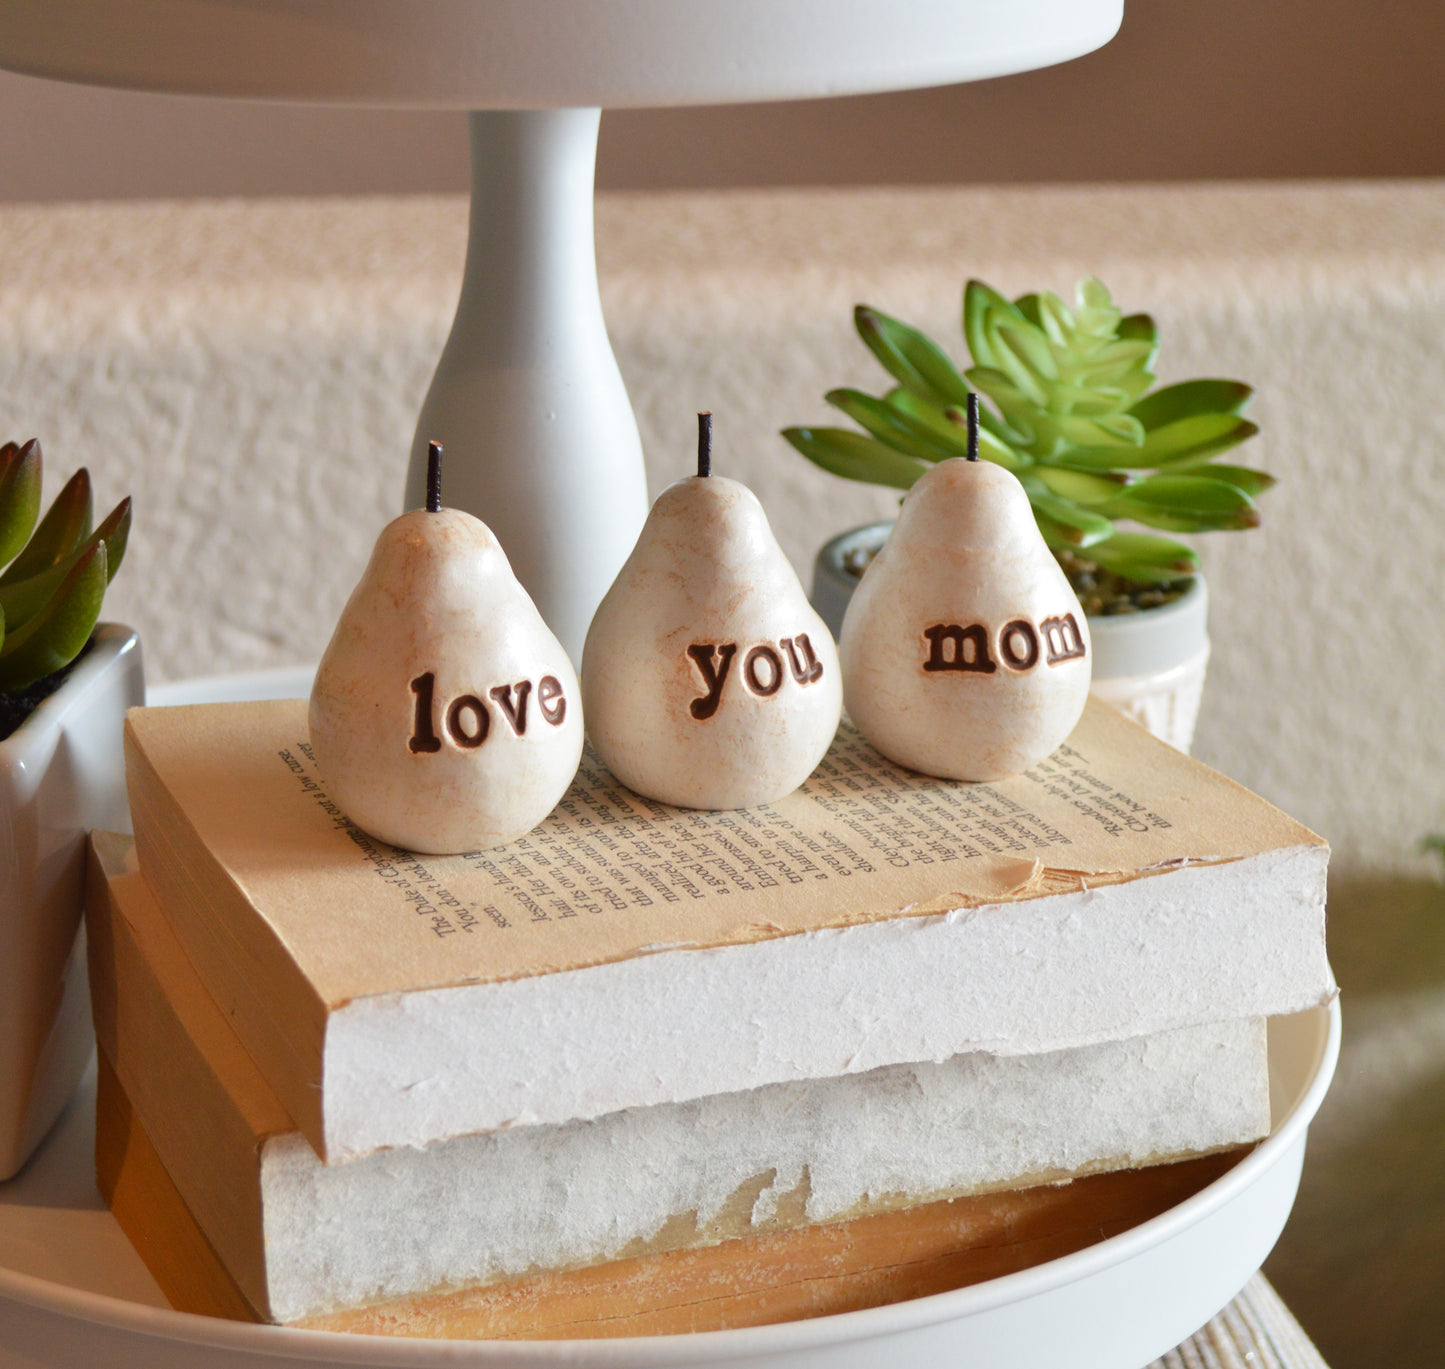 Gift for mom / Mother's Day gift for mothers / Gift from daughter, son, child, children / 3 white love you mom clay pears / Ready to ship